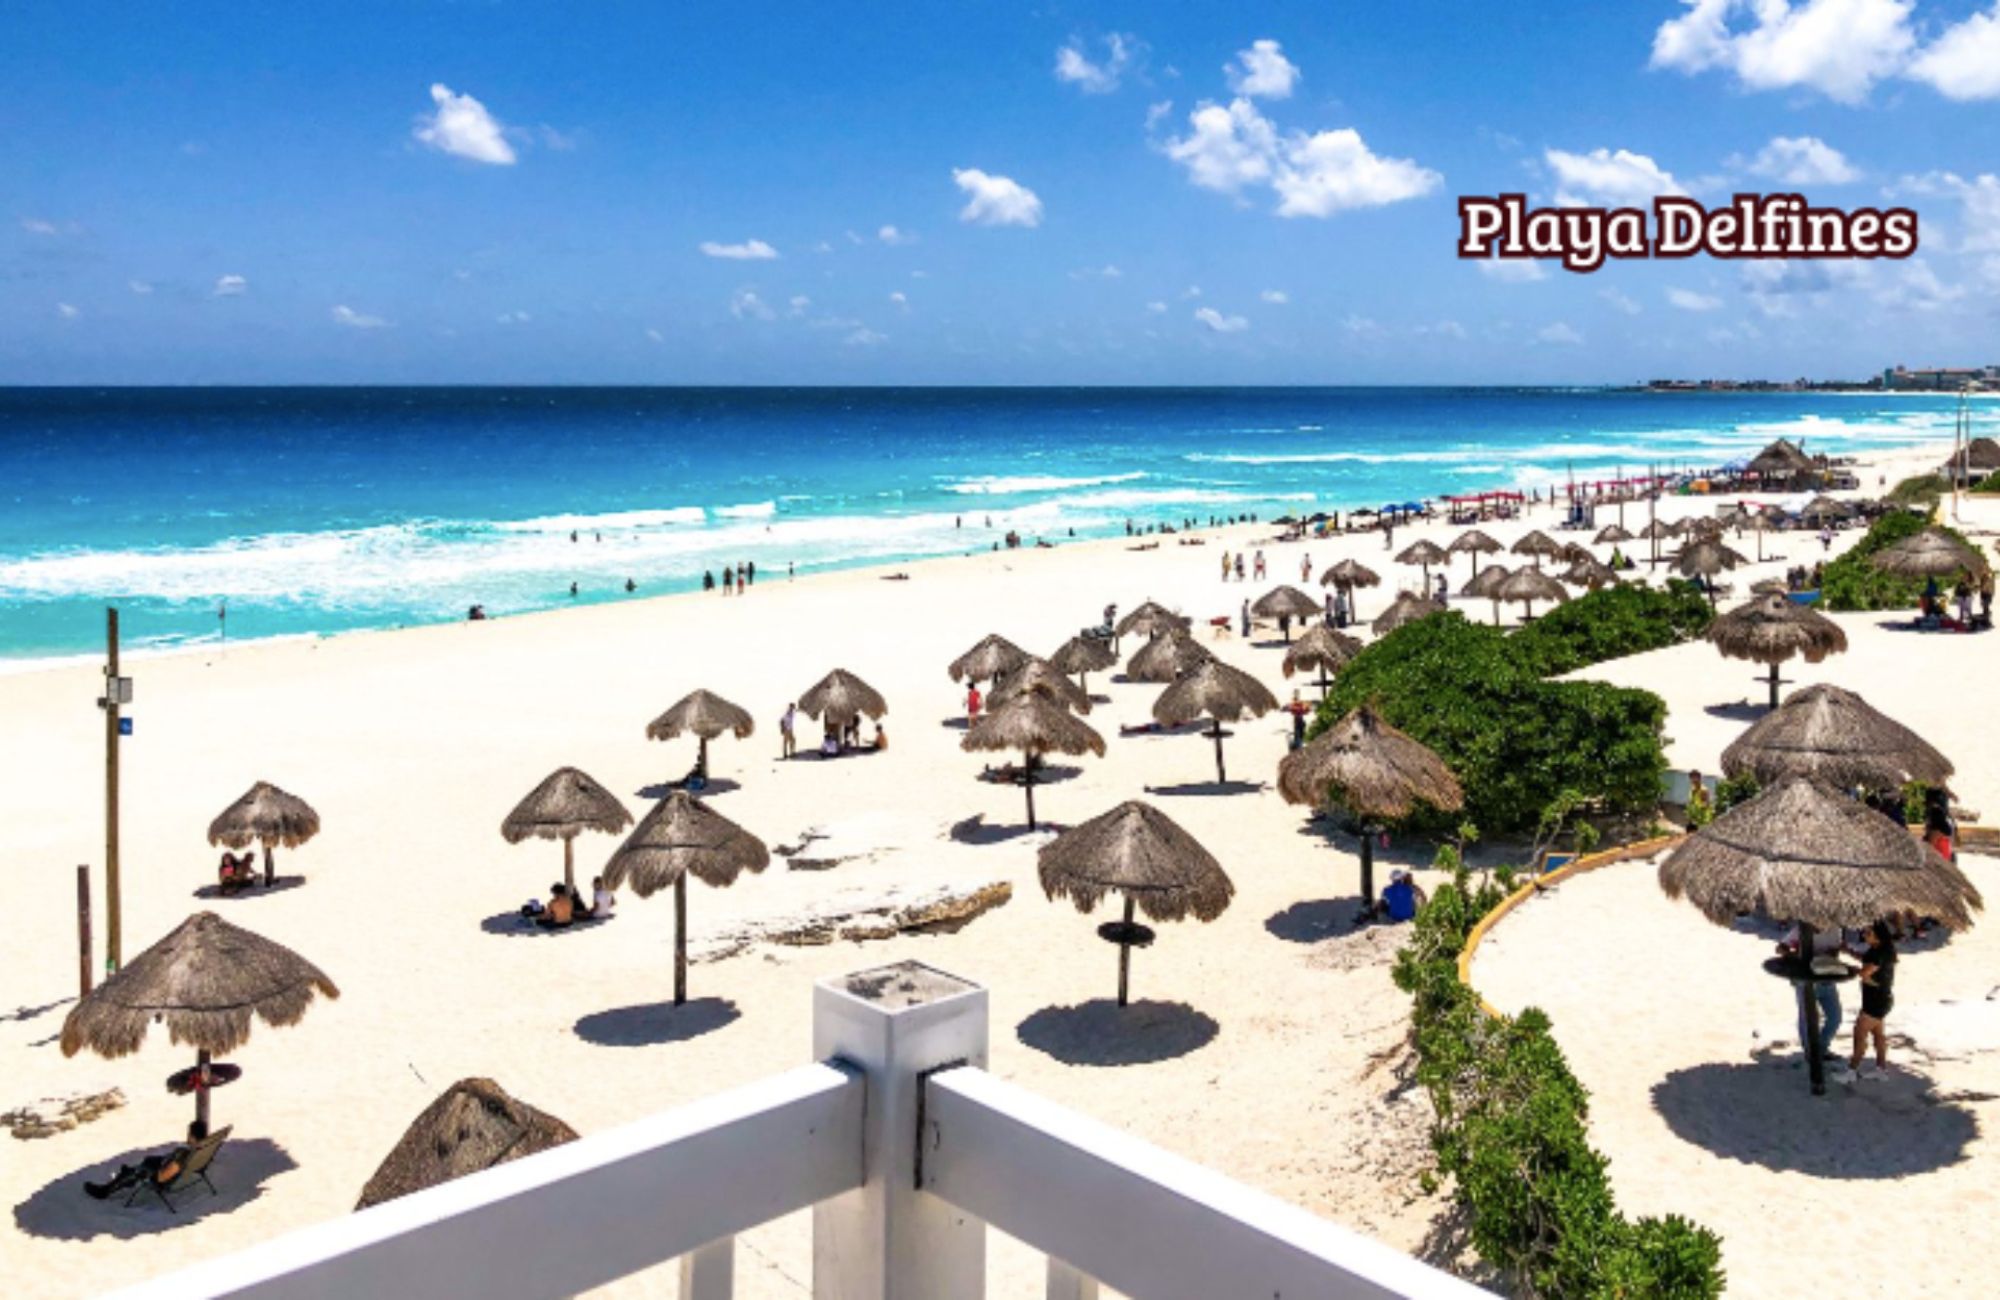 Condo with two terraces, pool, gym, pre-construction, for sale, Cancun, Quintana Roo.